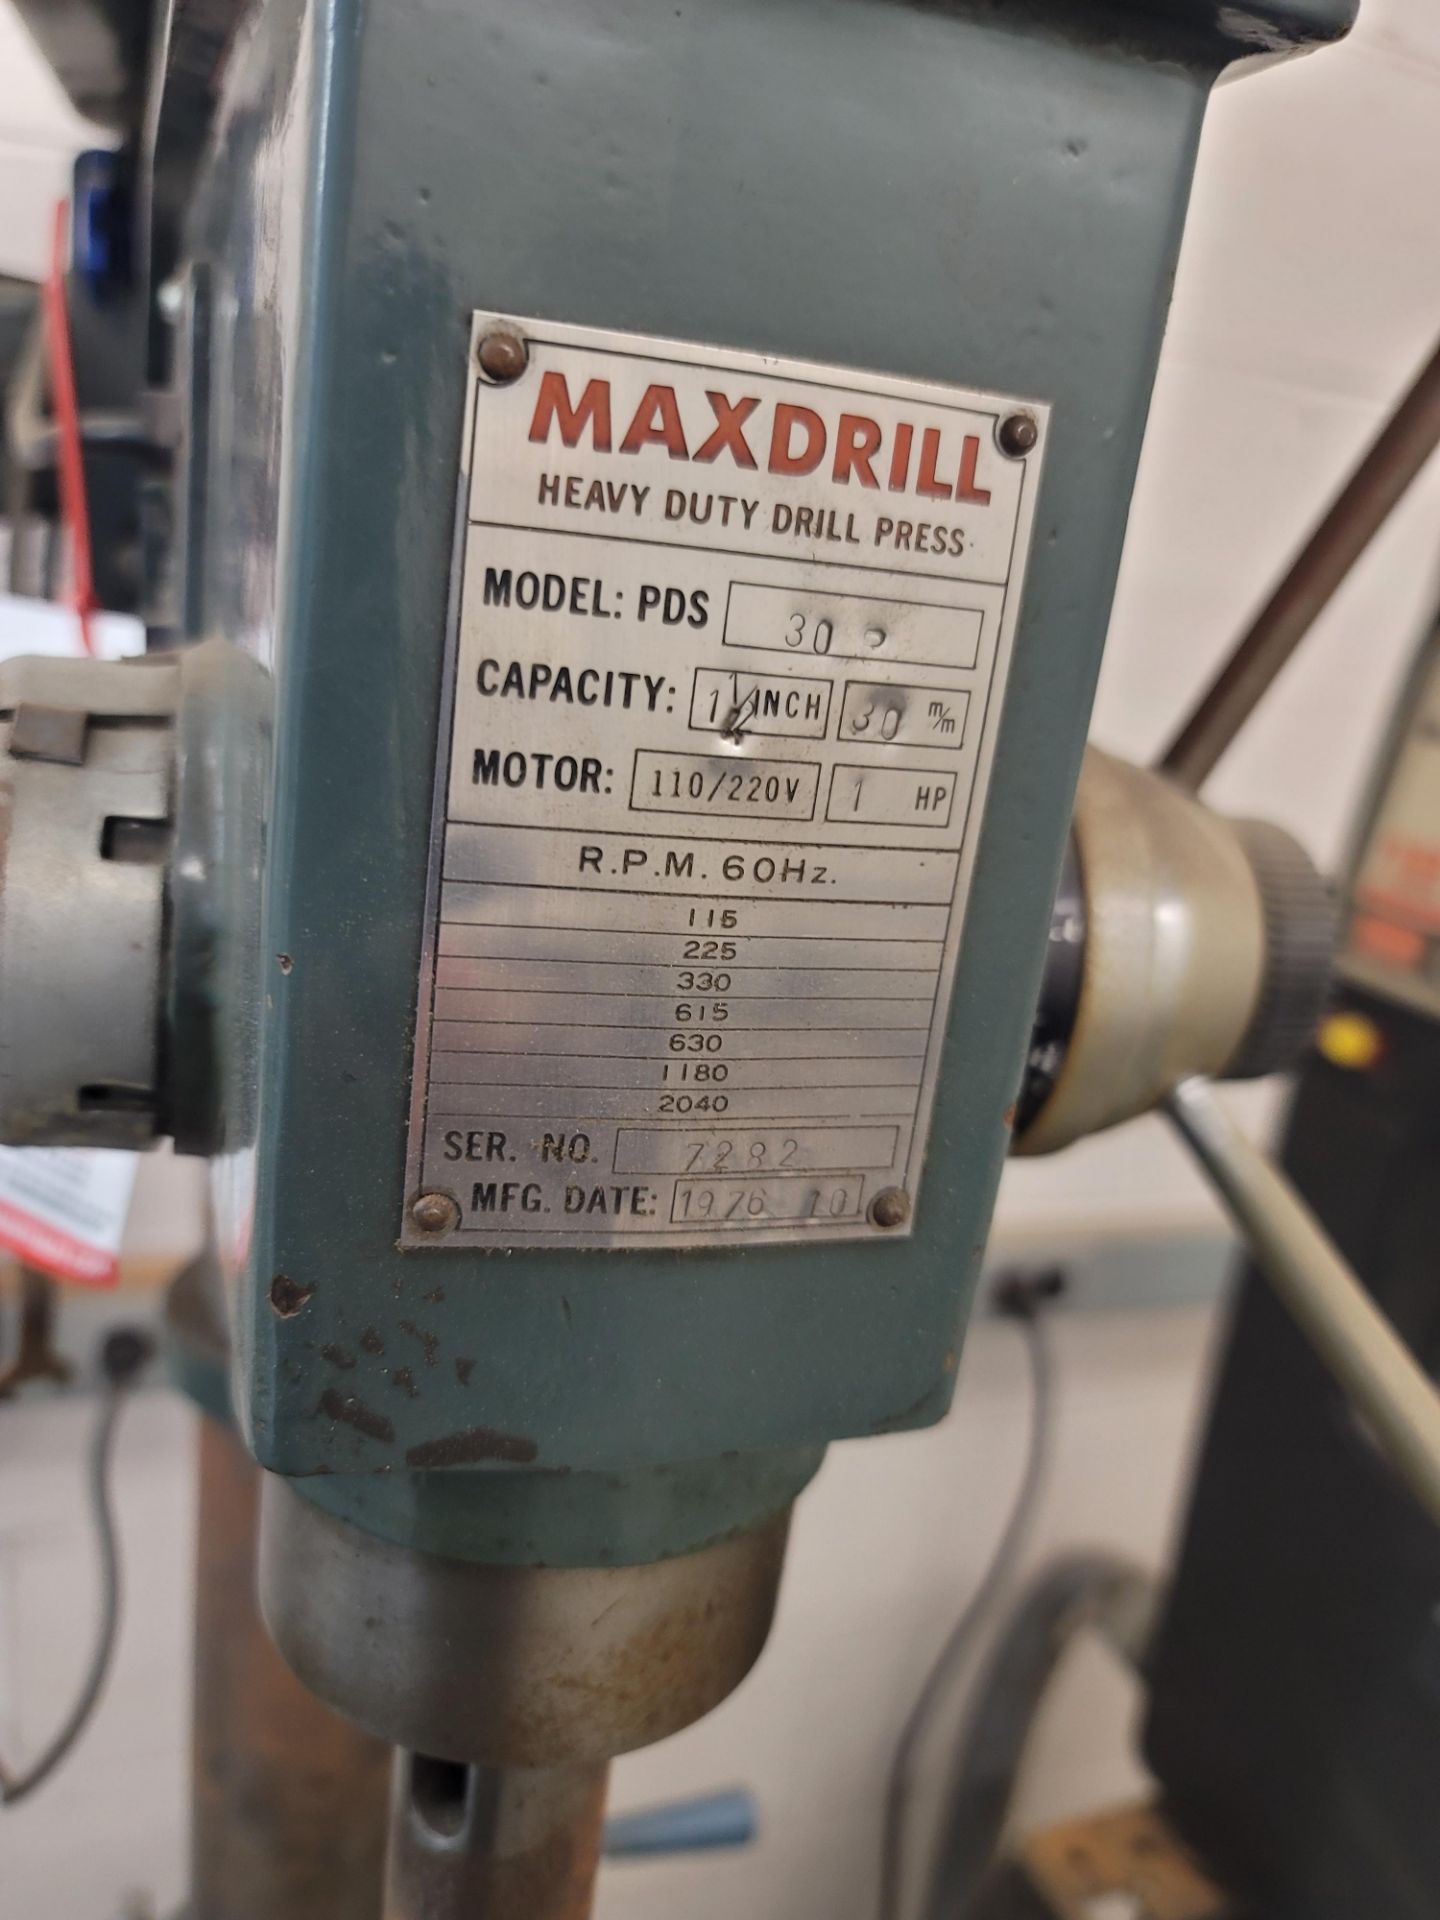 MAXDRILL 20" FLOOR DRILL PRESS, MODEL PDS-30, JACOBS 3/4" SUPER CHUCK, 1 HP, 110V, SINGLE PHASE, S/N - Image 2 of 2